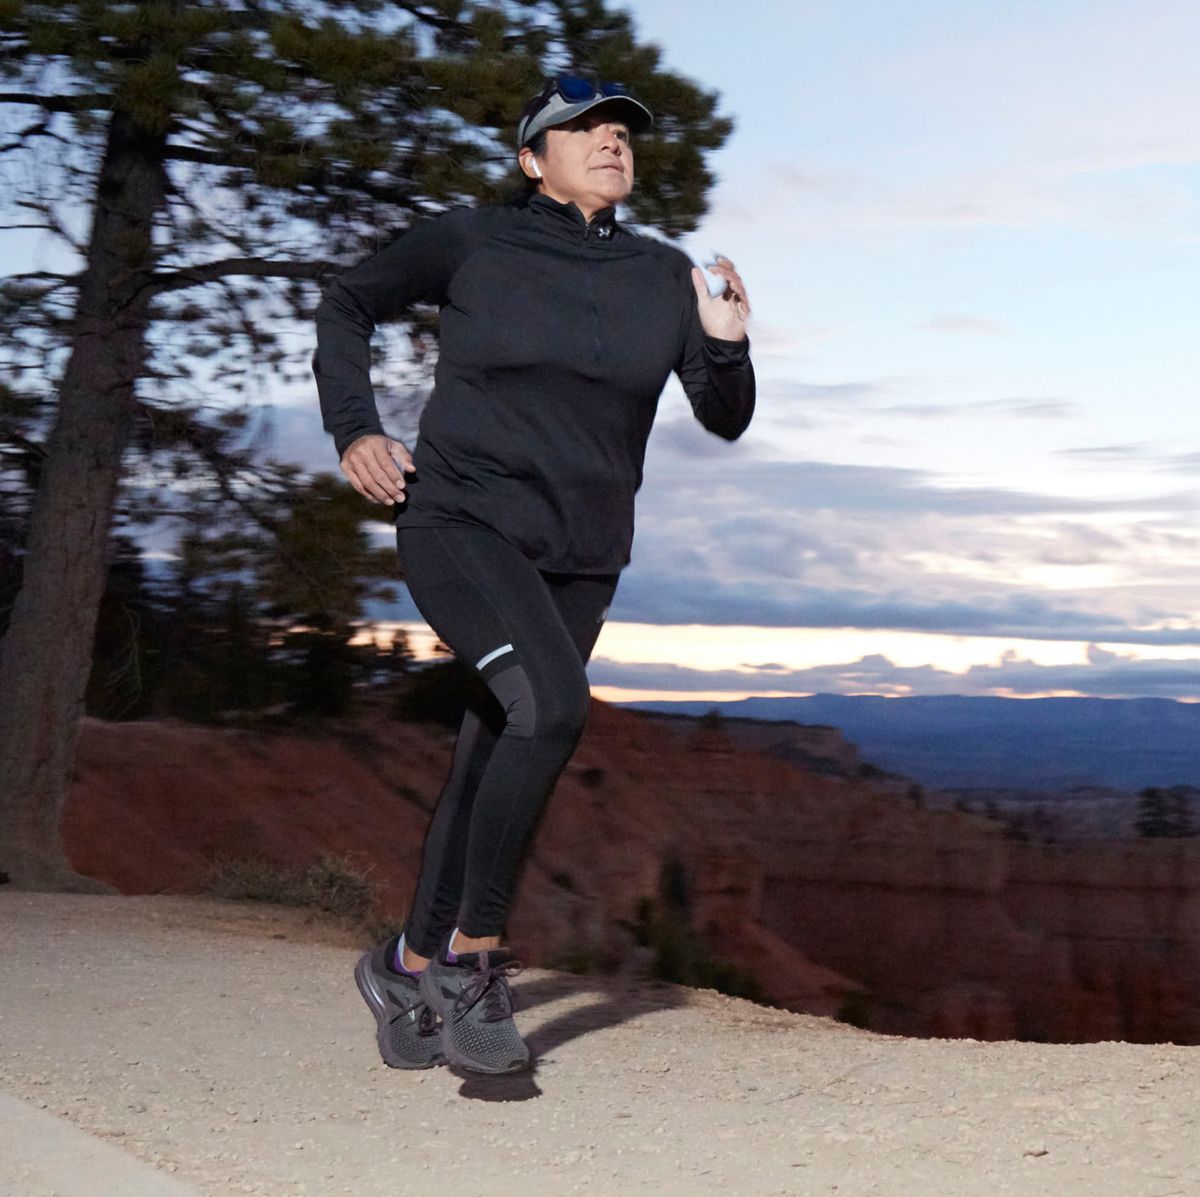 running at night in bryce canyon